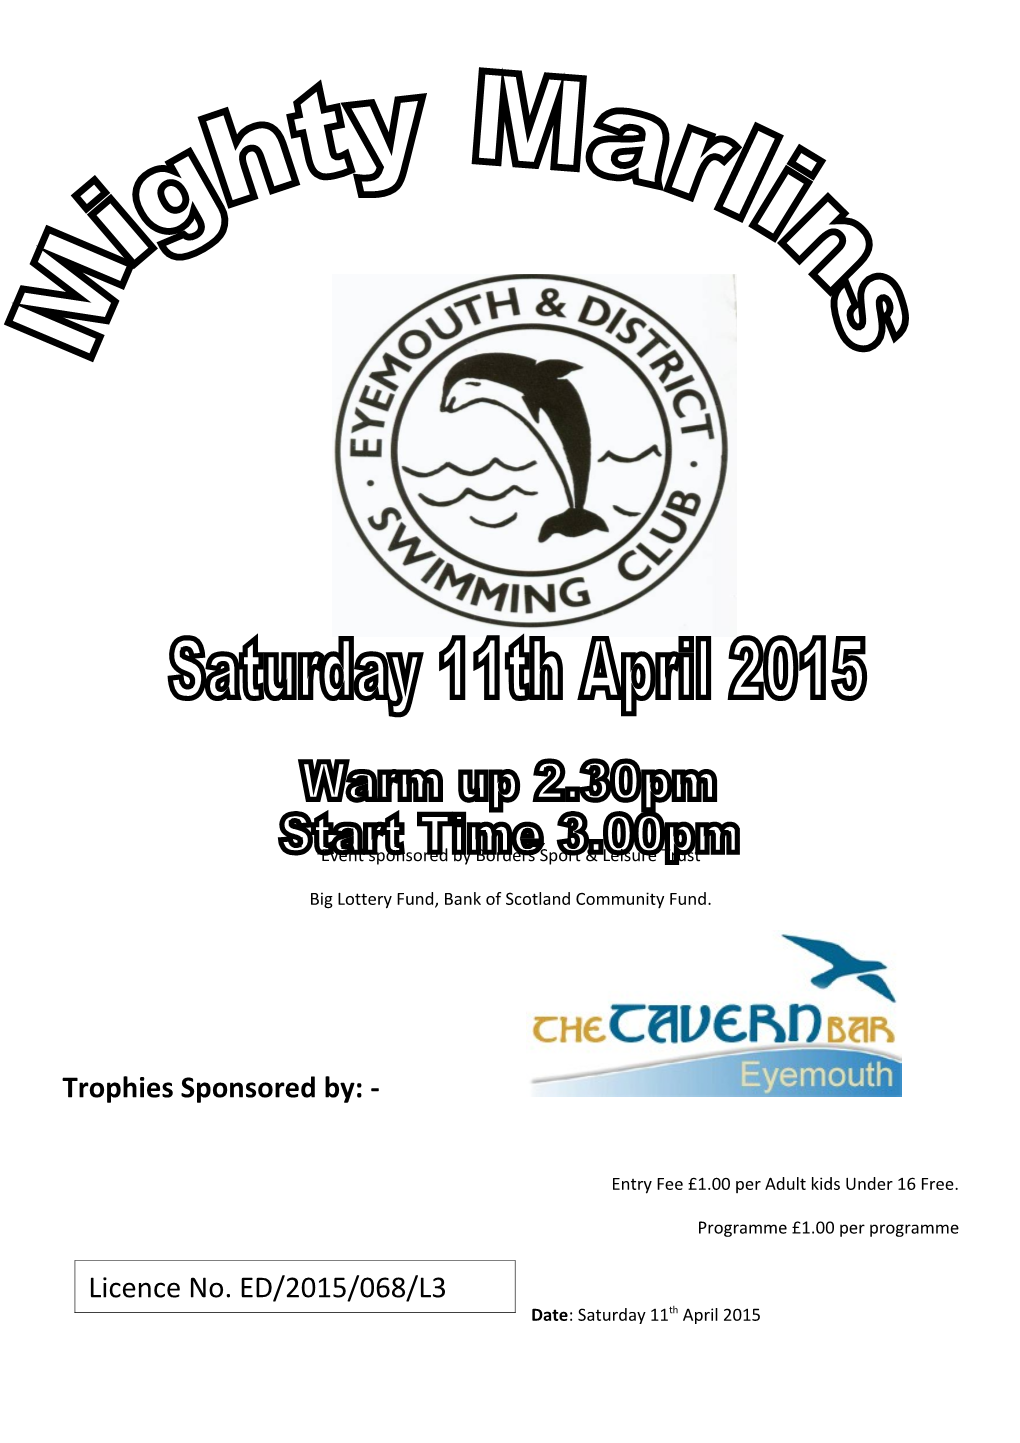 Event Sponsored by Borders Sport & Leisure Trust